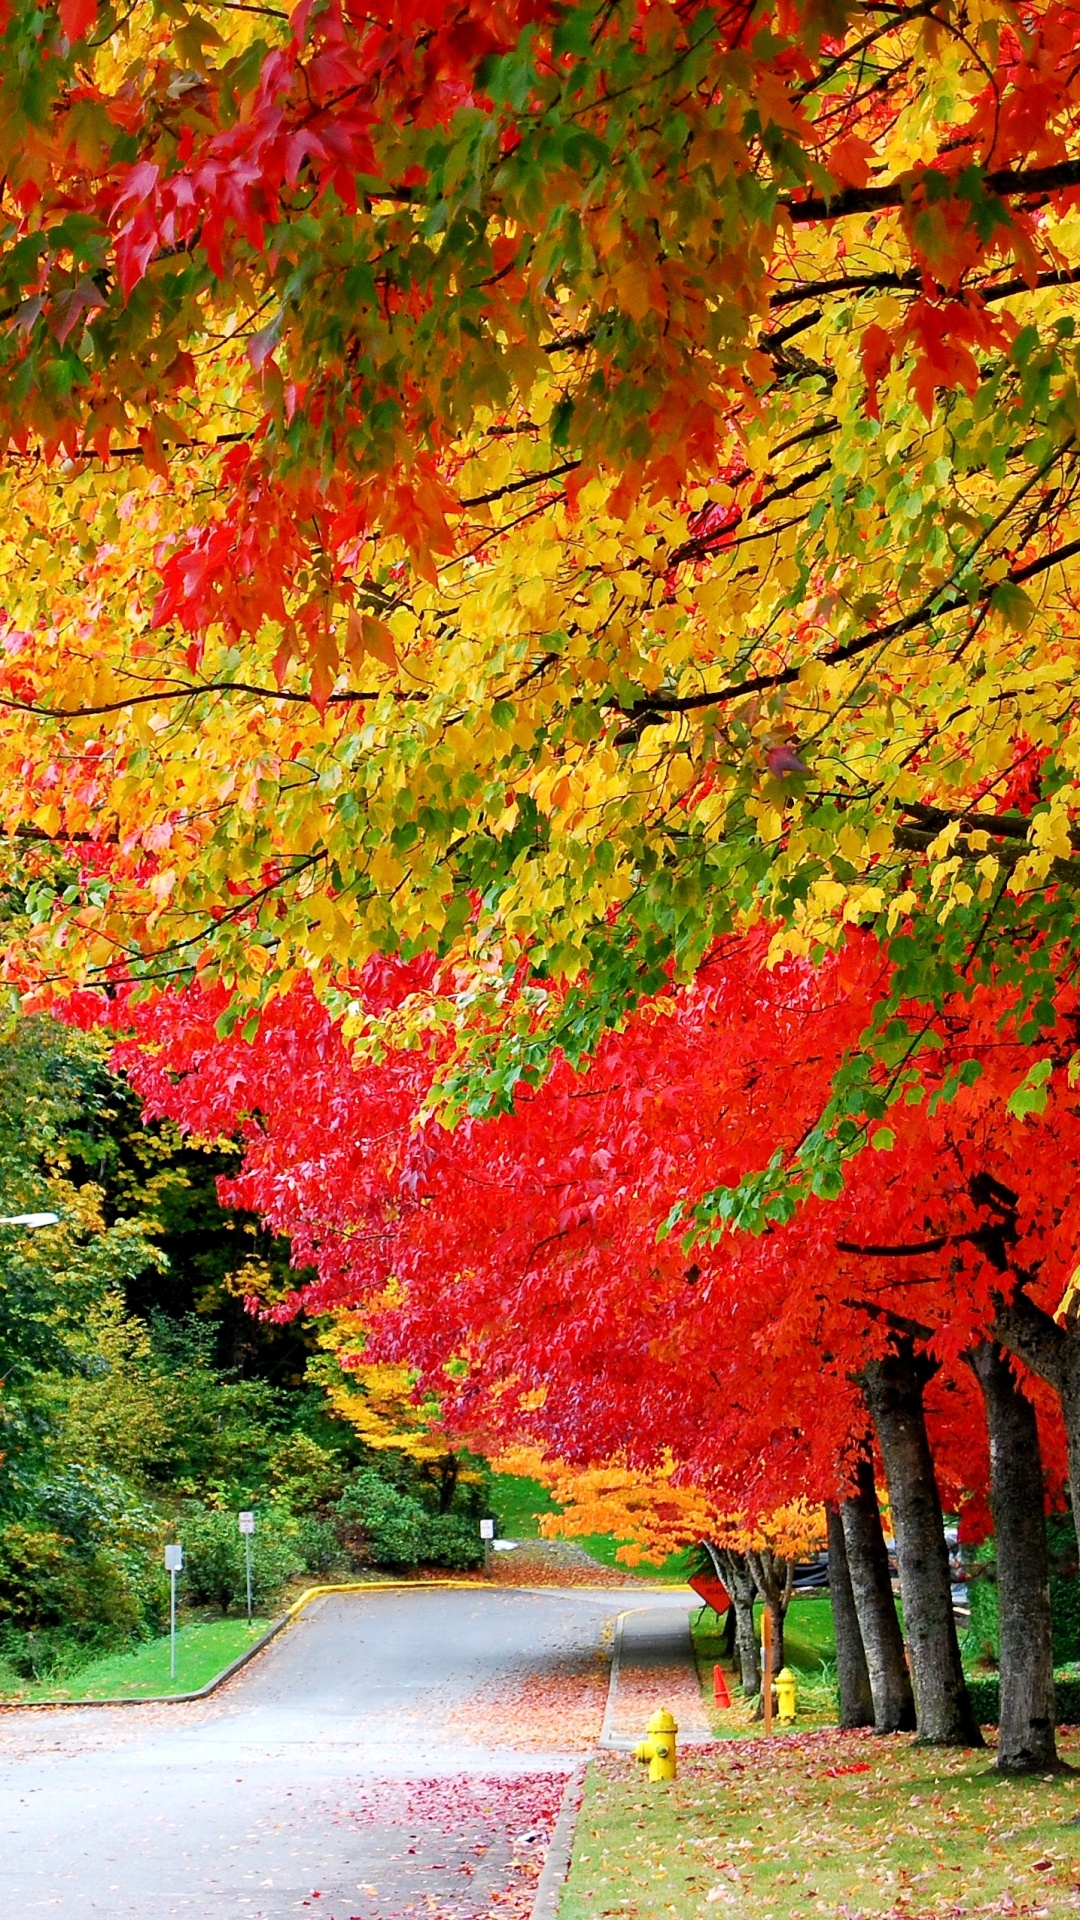 Red and Yellow Leaves on The Road. Wallpaper in 1080x1920 Resolution